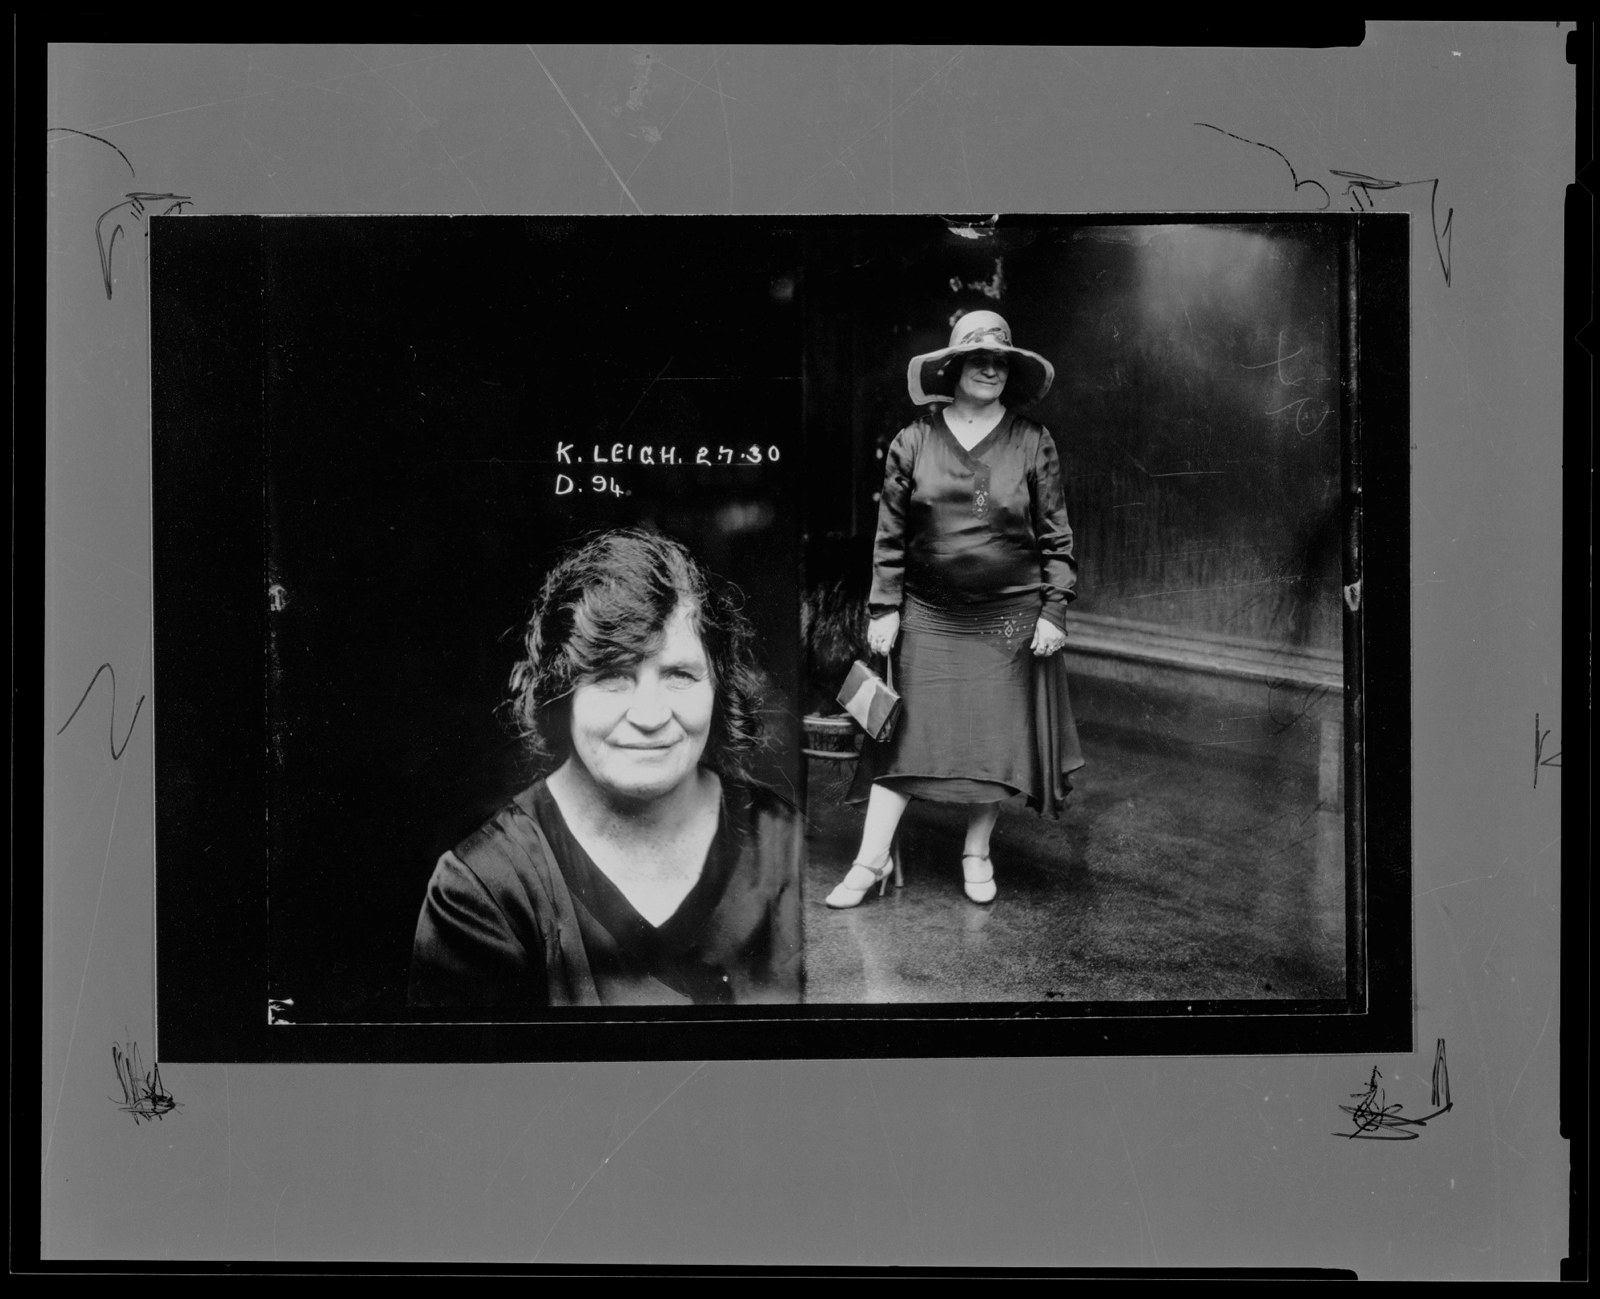 Copy negative from photograph of Kate Leigh, Special Photograph number D94, 2 July 1930, Central Police Station, Sydney.